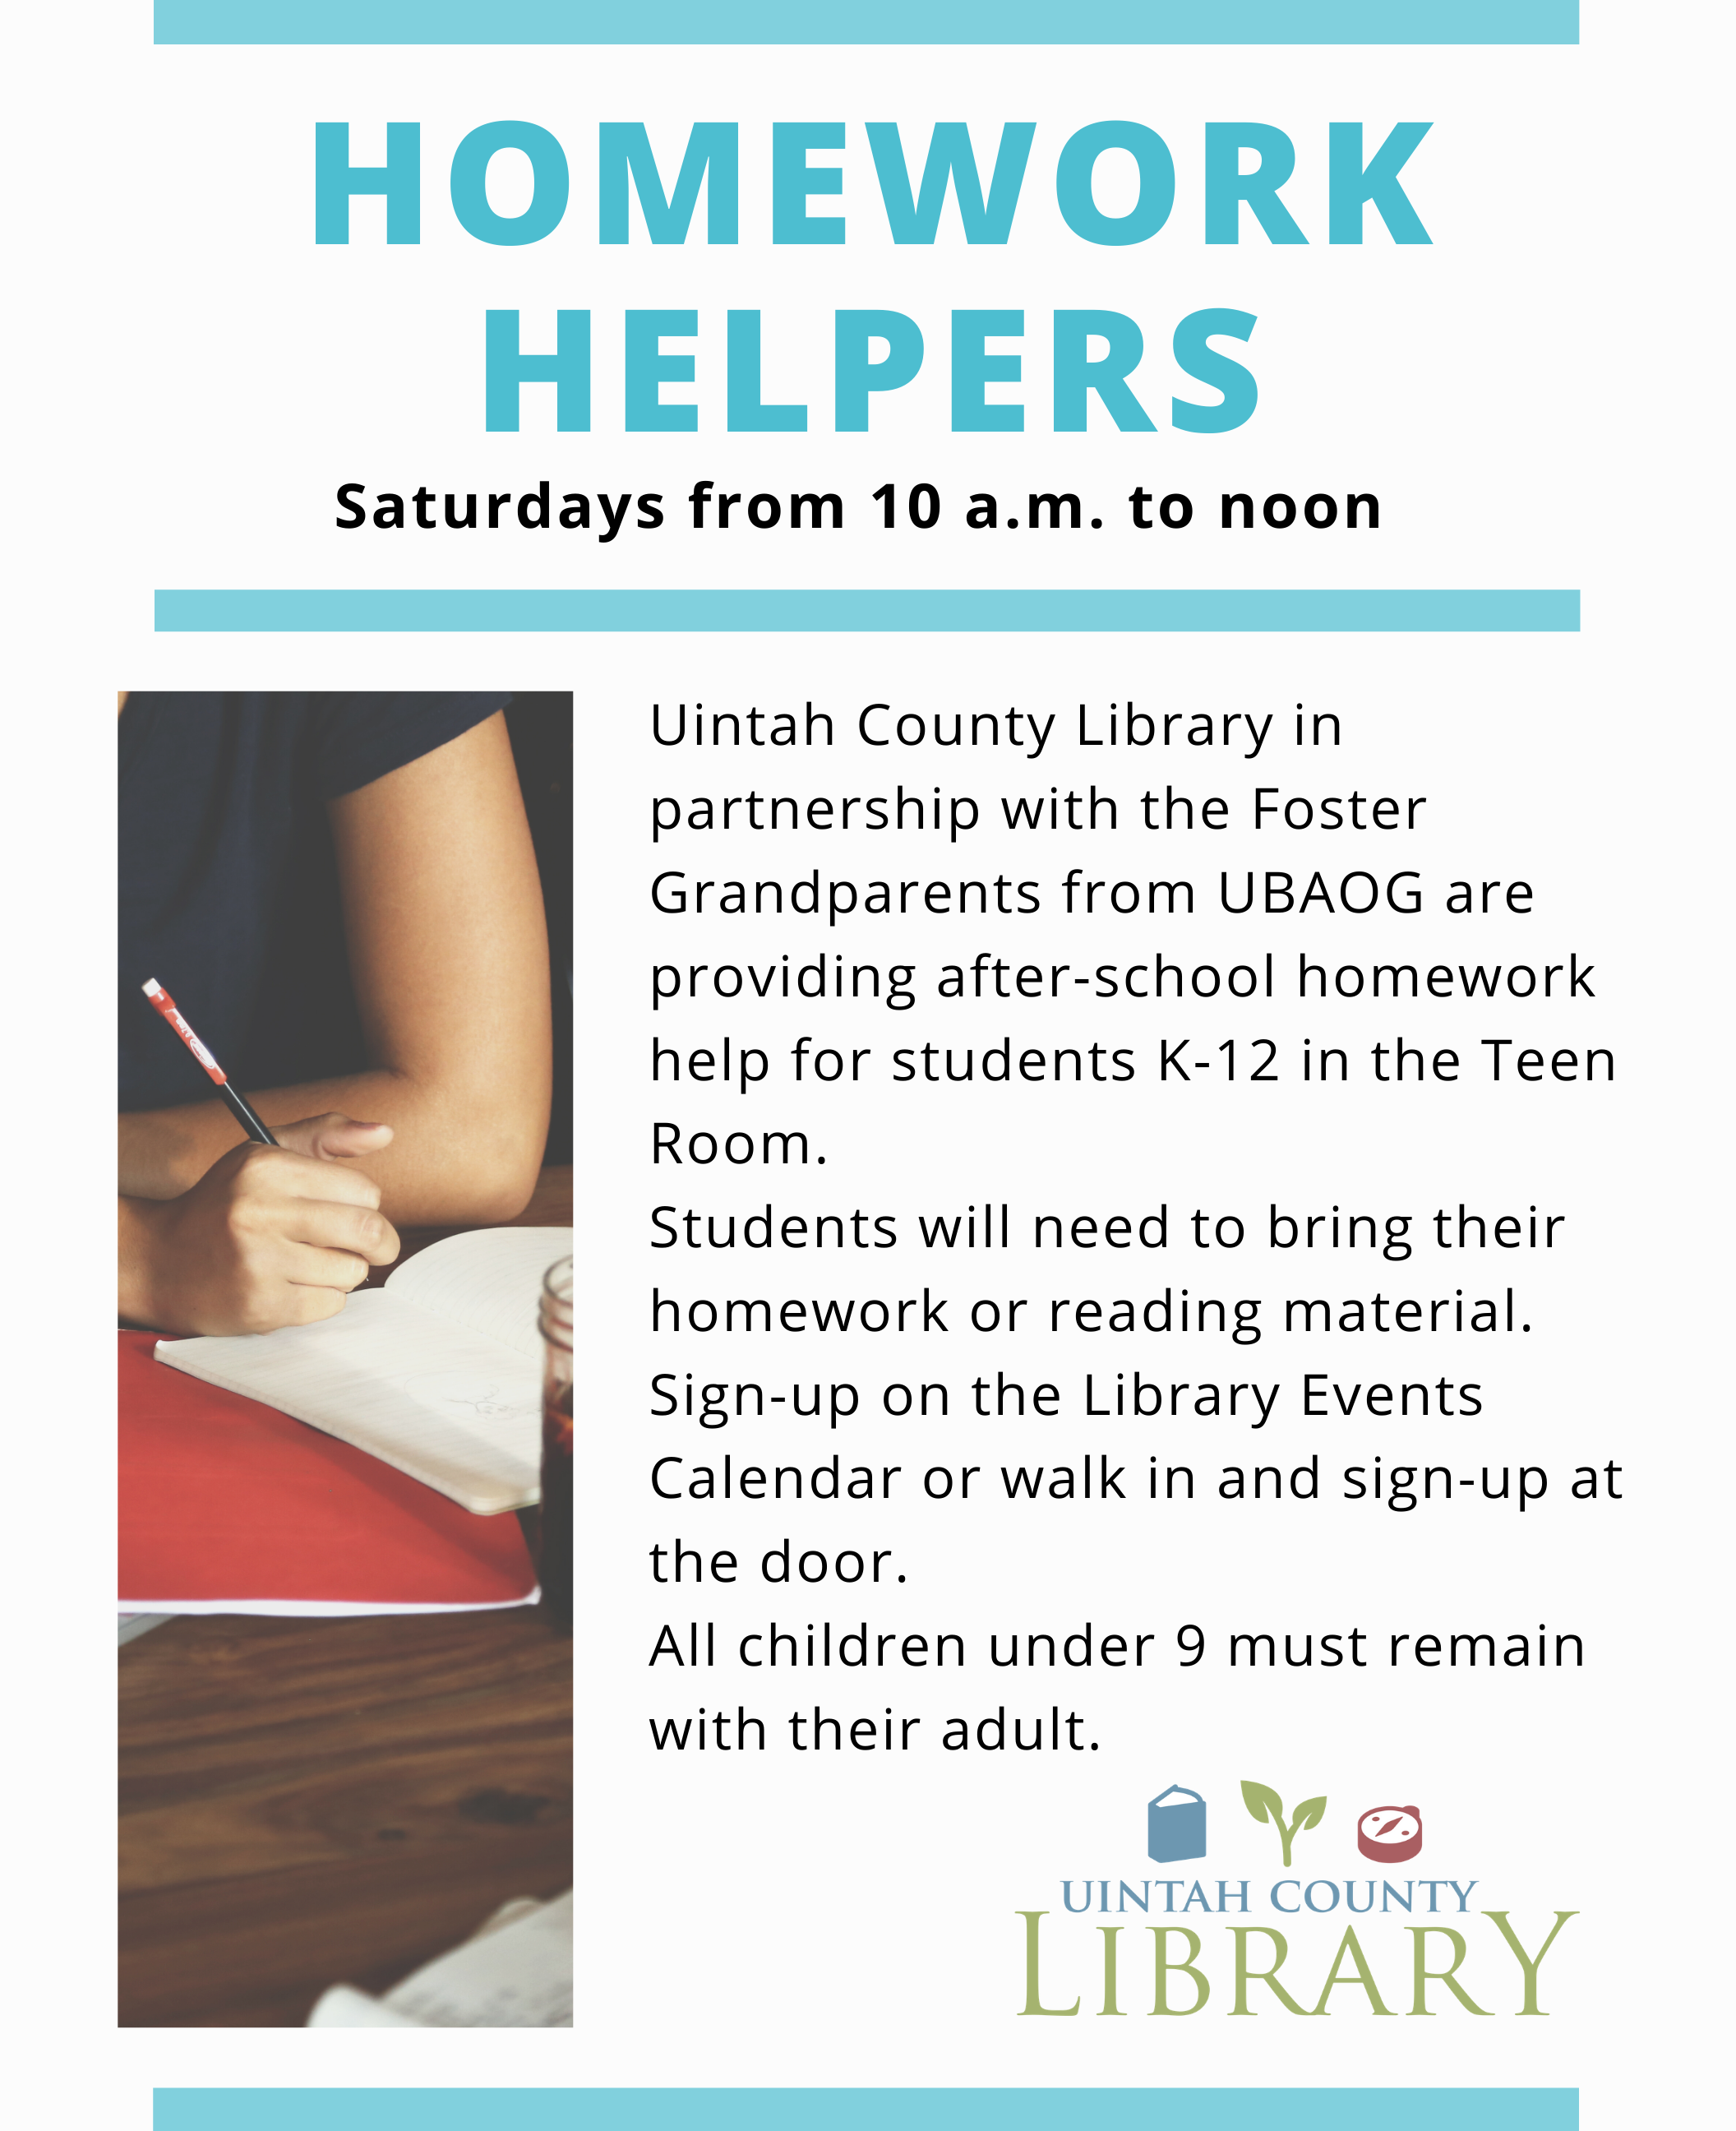 Homework Helpers  Saturdays from 10:00 a.m. to noon  Uintah County Library in partnership with the Foster Grandparents from UBAOG are providing after-school homework help for students K-12 in the Teen Room.  Students will need to bring their homework or reading material.  Sign-up on the Library Events Calendar or walk in and sign-up at the door.  All children under 9 must remain with their adult. 